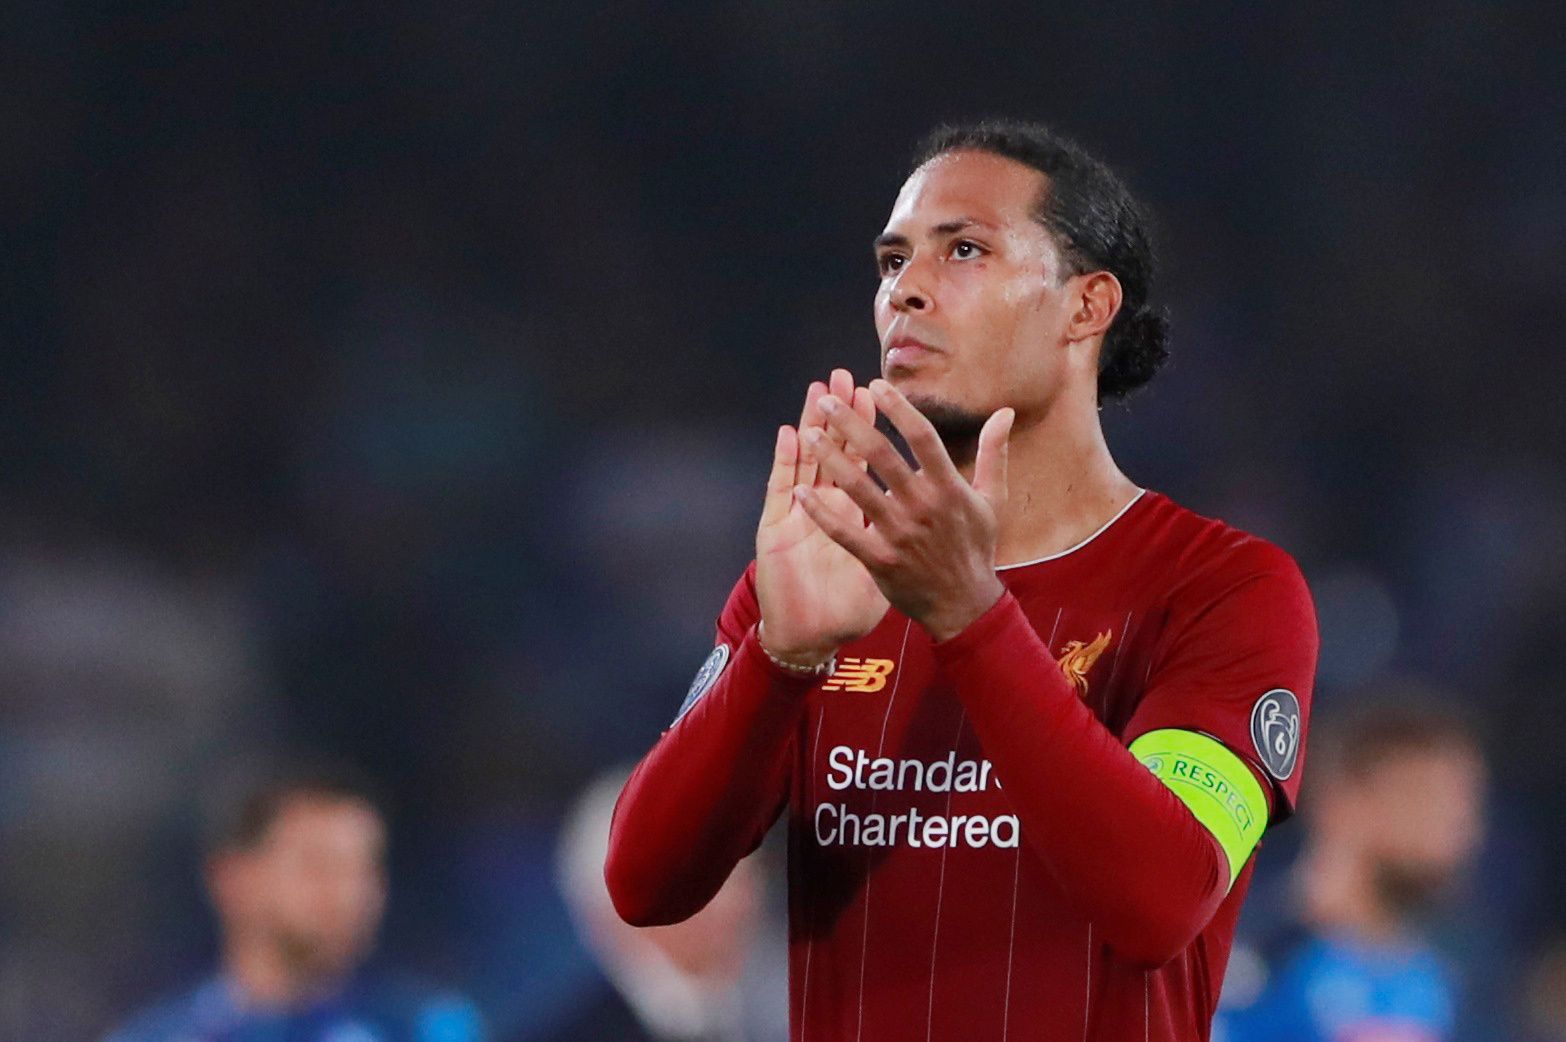 Soccer Football - Champions League - Group E - Napoli v Liverpool - Stadio San Paolo, Naples, Italy - September 17, 2019  Liverpool's Virgil van Dijk applauds fans after the match                      Action Images via Reuters/Andrew Couldridge